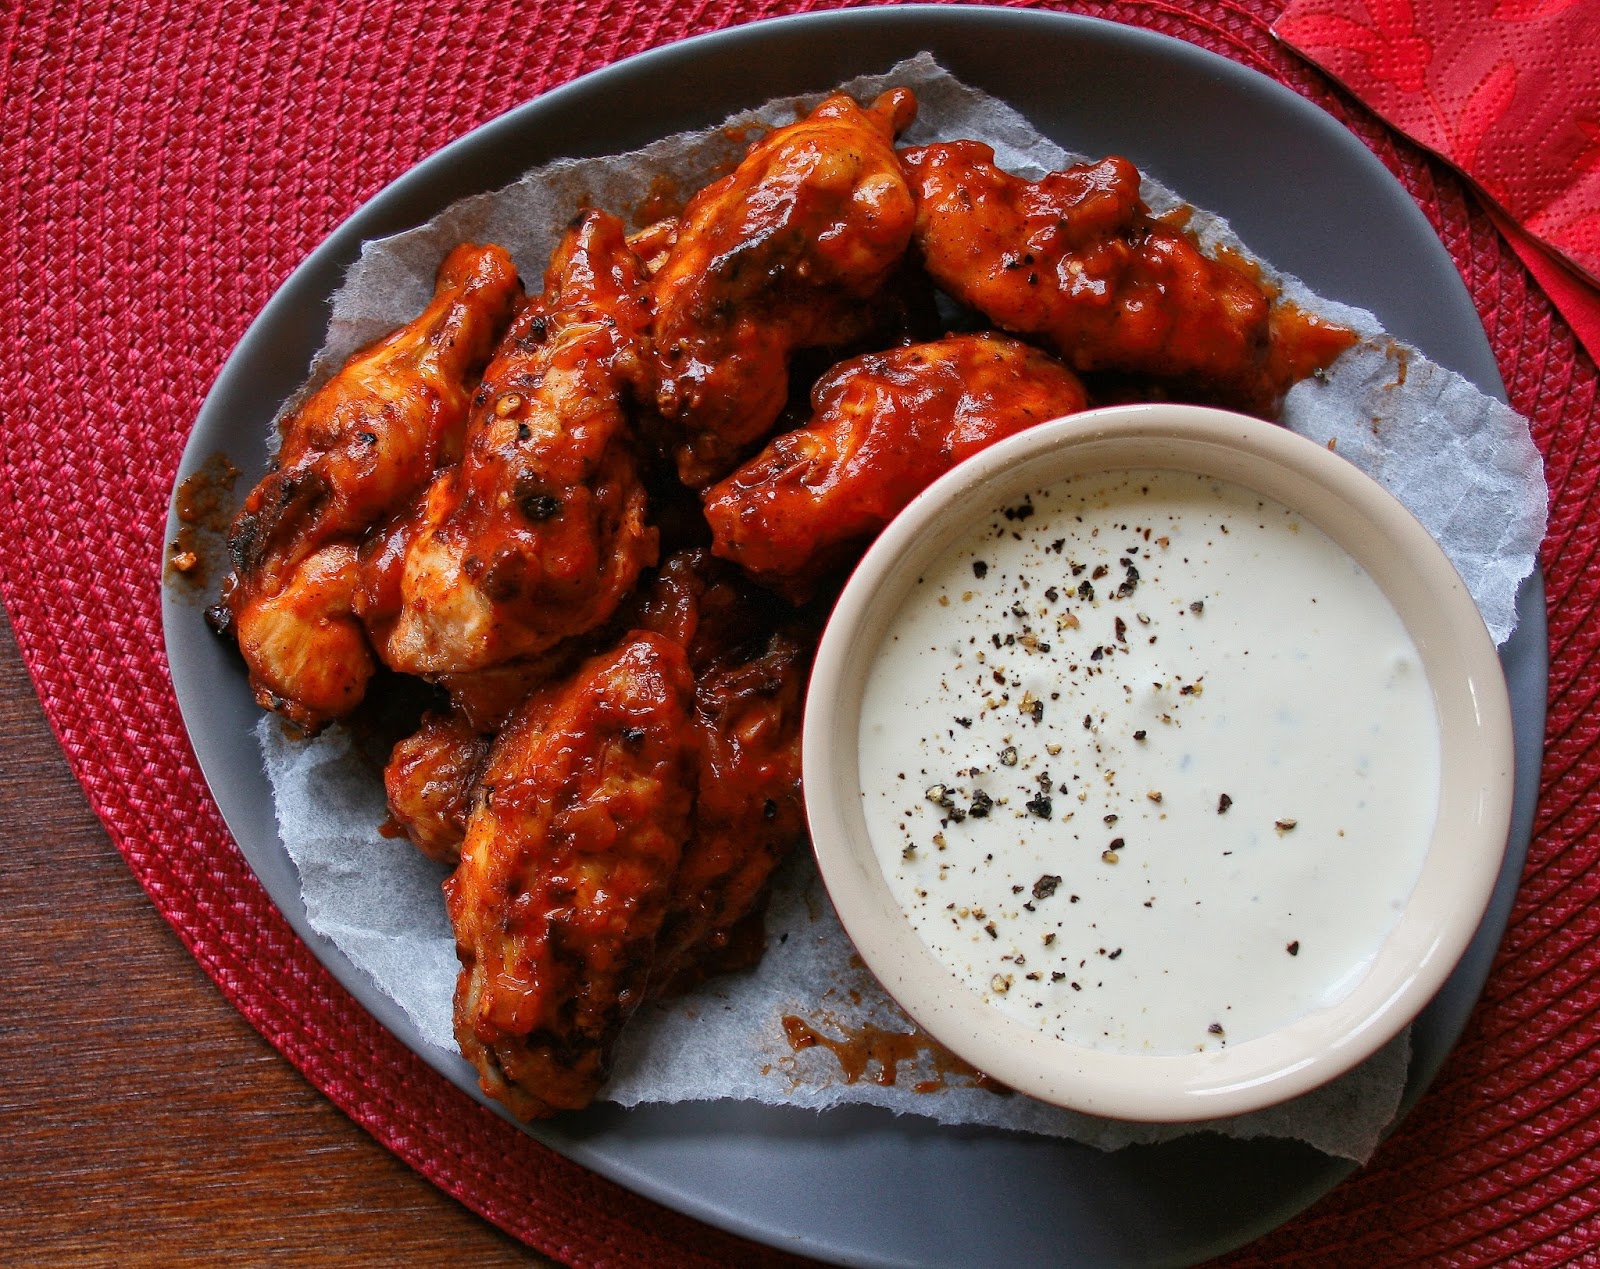 Asian chicken with a white sugary sauce